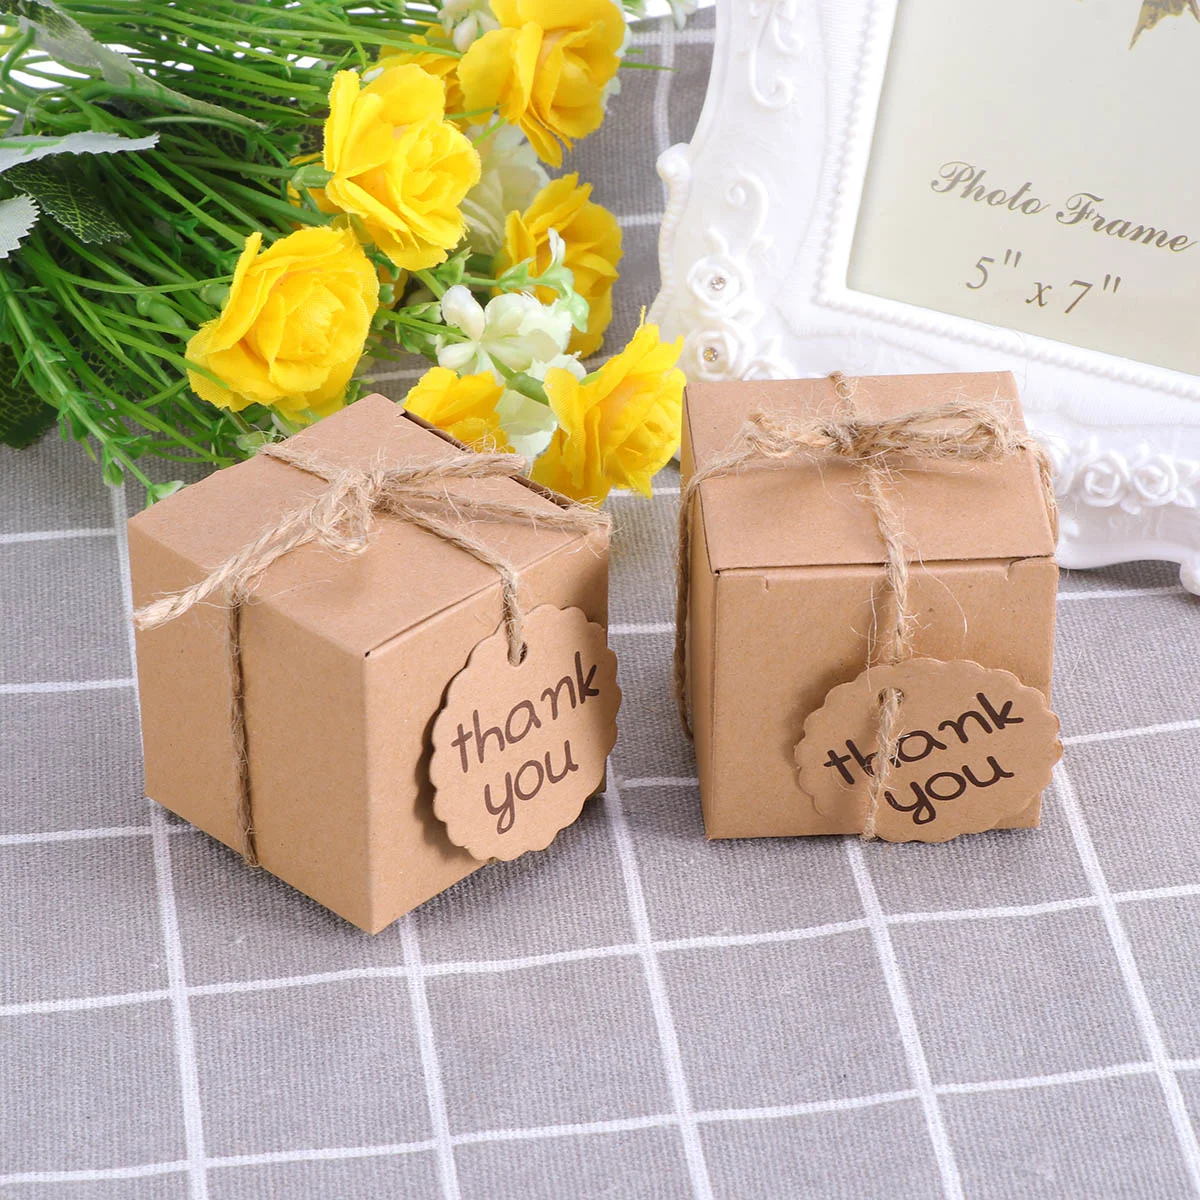 

Boxes Candy Gift Kraft Wedding Paper You Thank Box Christmasbrown Favortreat Lids Foldable Presents Boxe Rustic Pillow Earrings